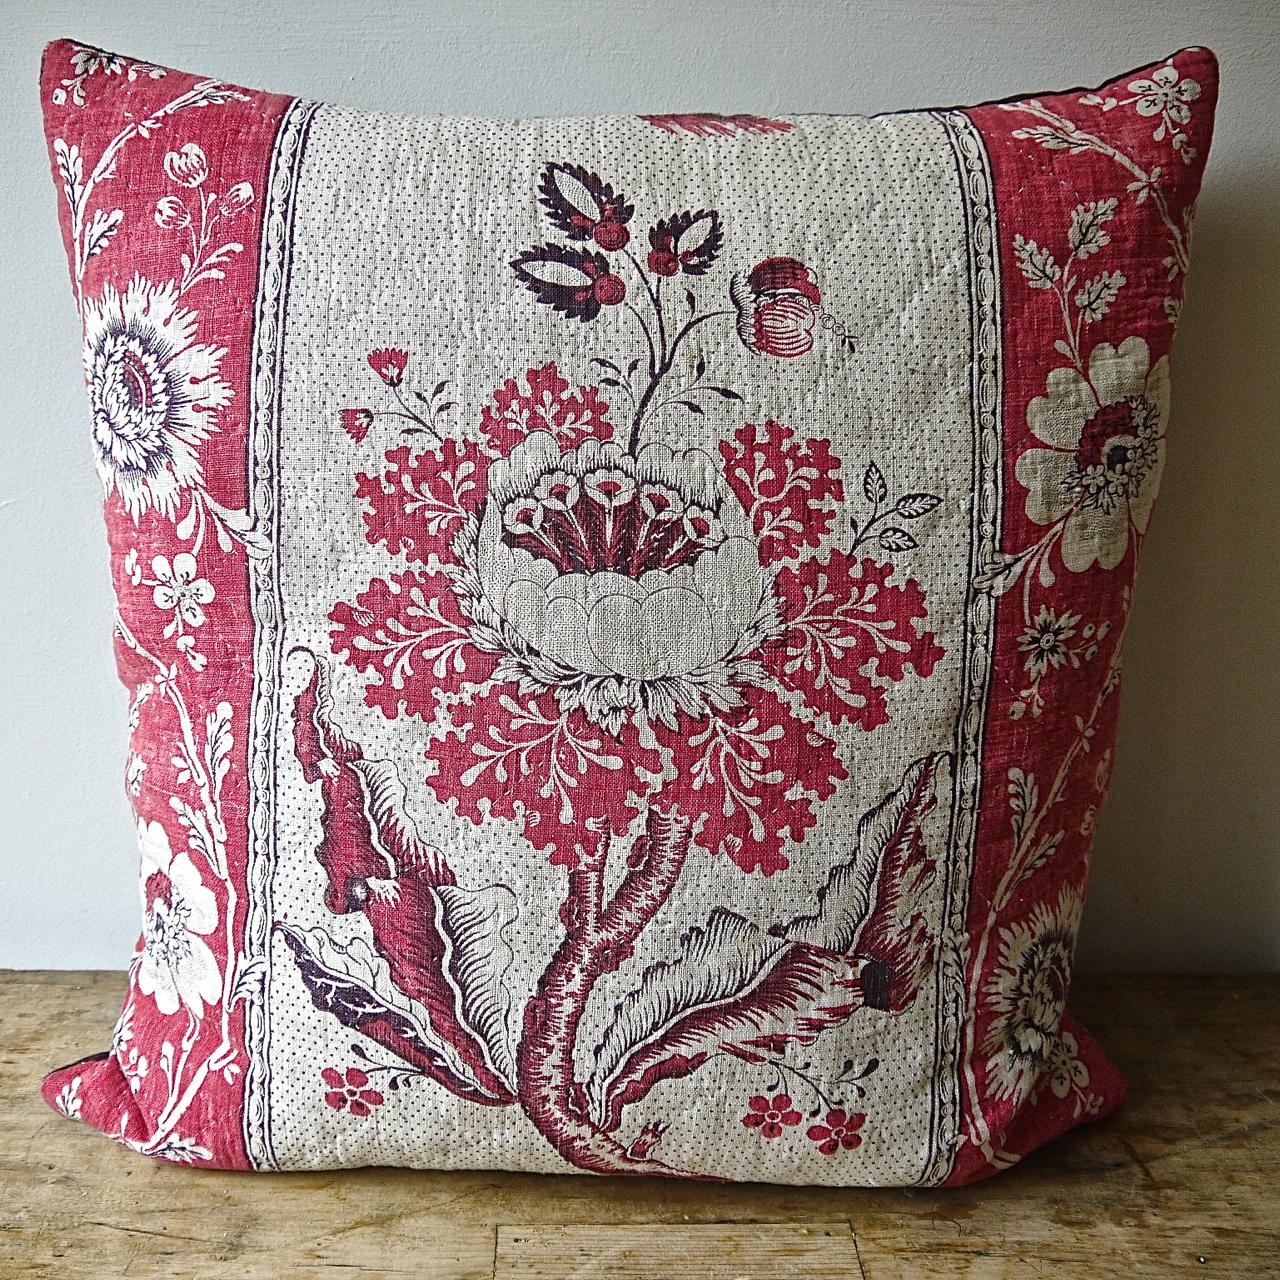 Pair of cushions made from a French, circa 1790s block printed soft cotton and linen mix textile and quilted. A striking design in a pleasing rasberry red and a darker mauve on a picotage ground. Backed in a dyed vintage linen, slipstitched closed